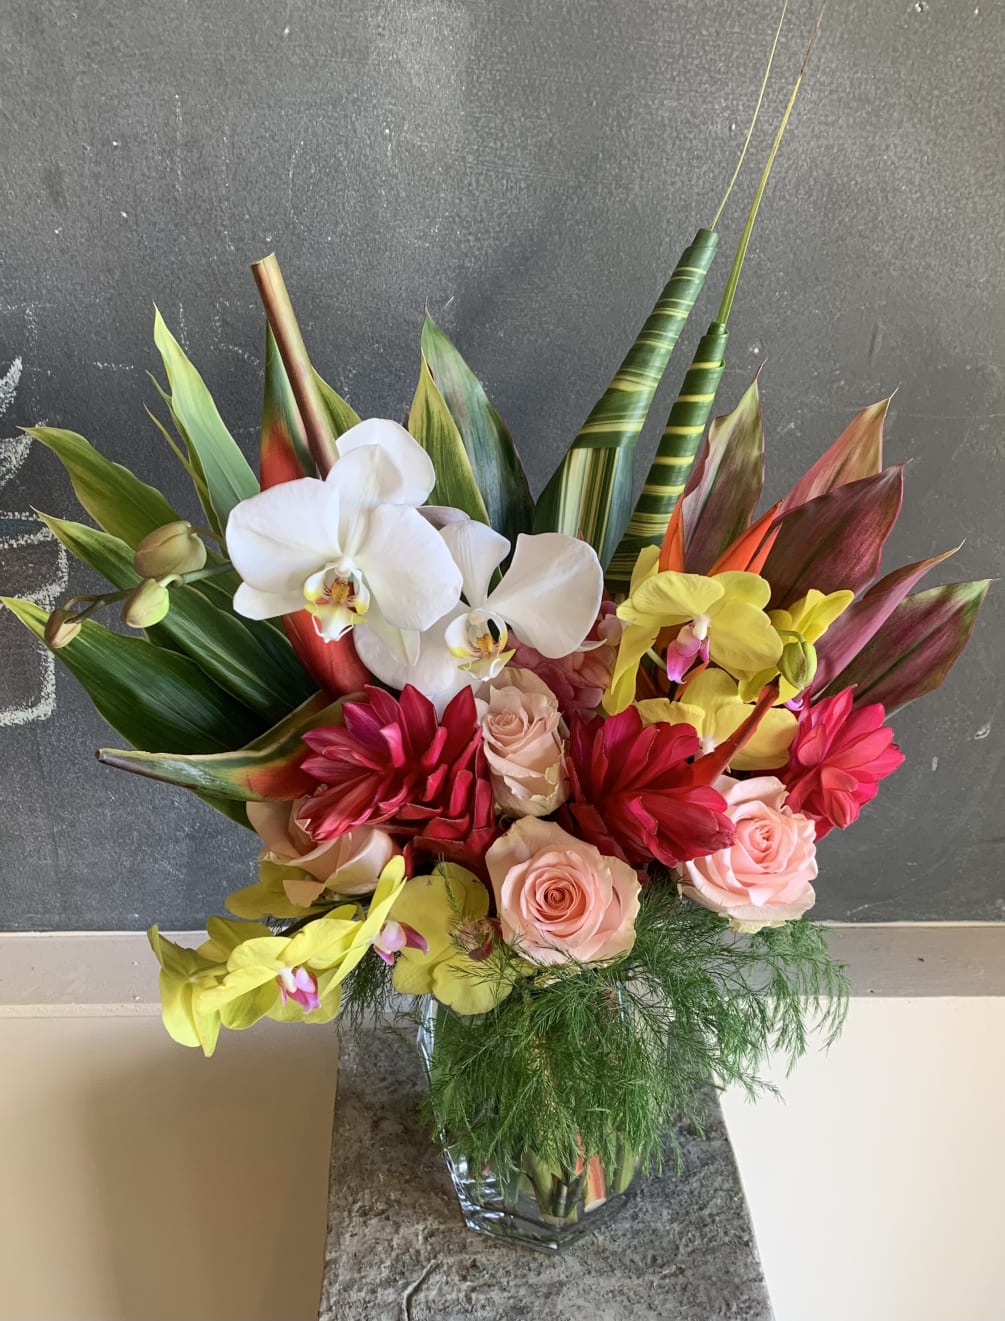 This arrangement brings the beauty of the tropics to life!